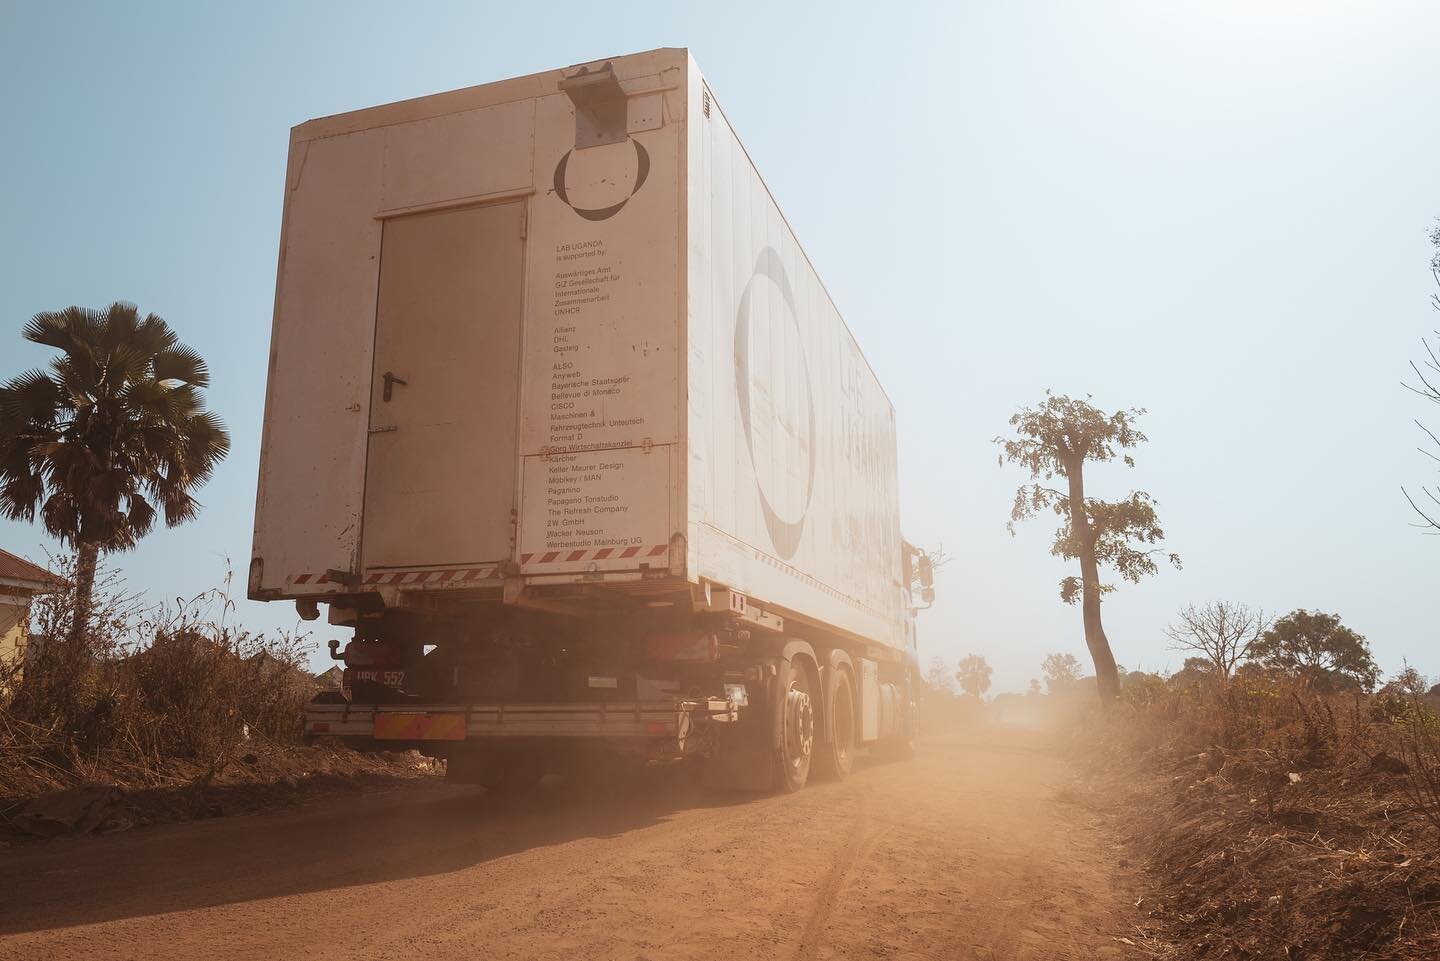 Do you know what happened to our LAB? 

Our LAB truck broke down as it was on its way from BidiBidi refugee settlement to Kampala. The center bearing needed immediate replacing and could only be sourced in the UK. Luckily our wonderful partner  @bras